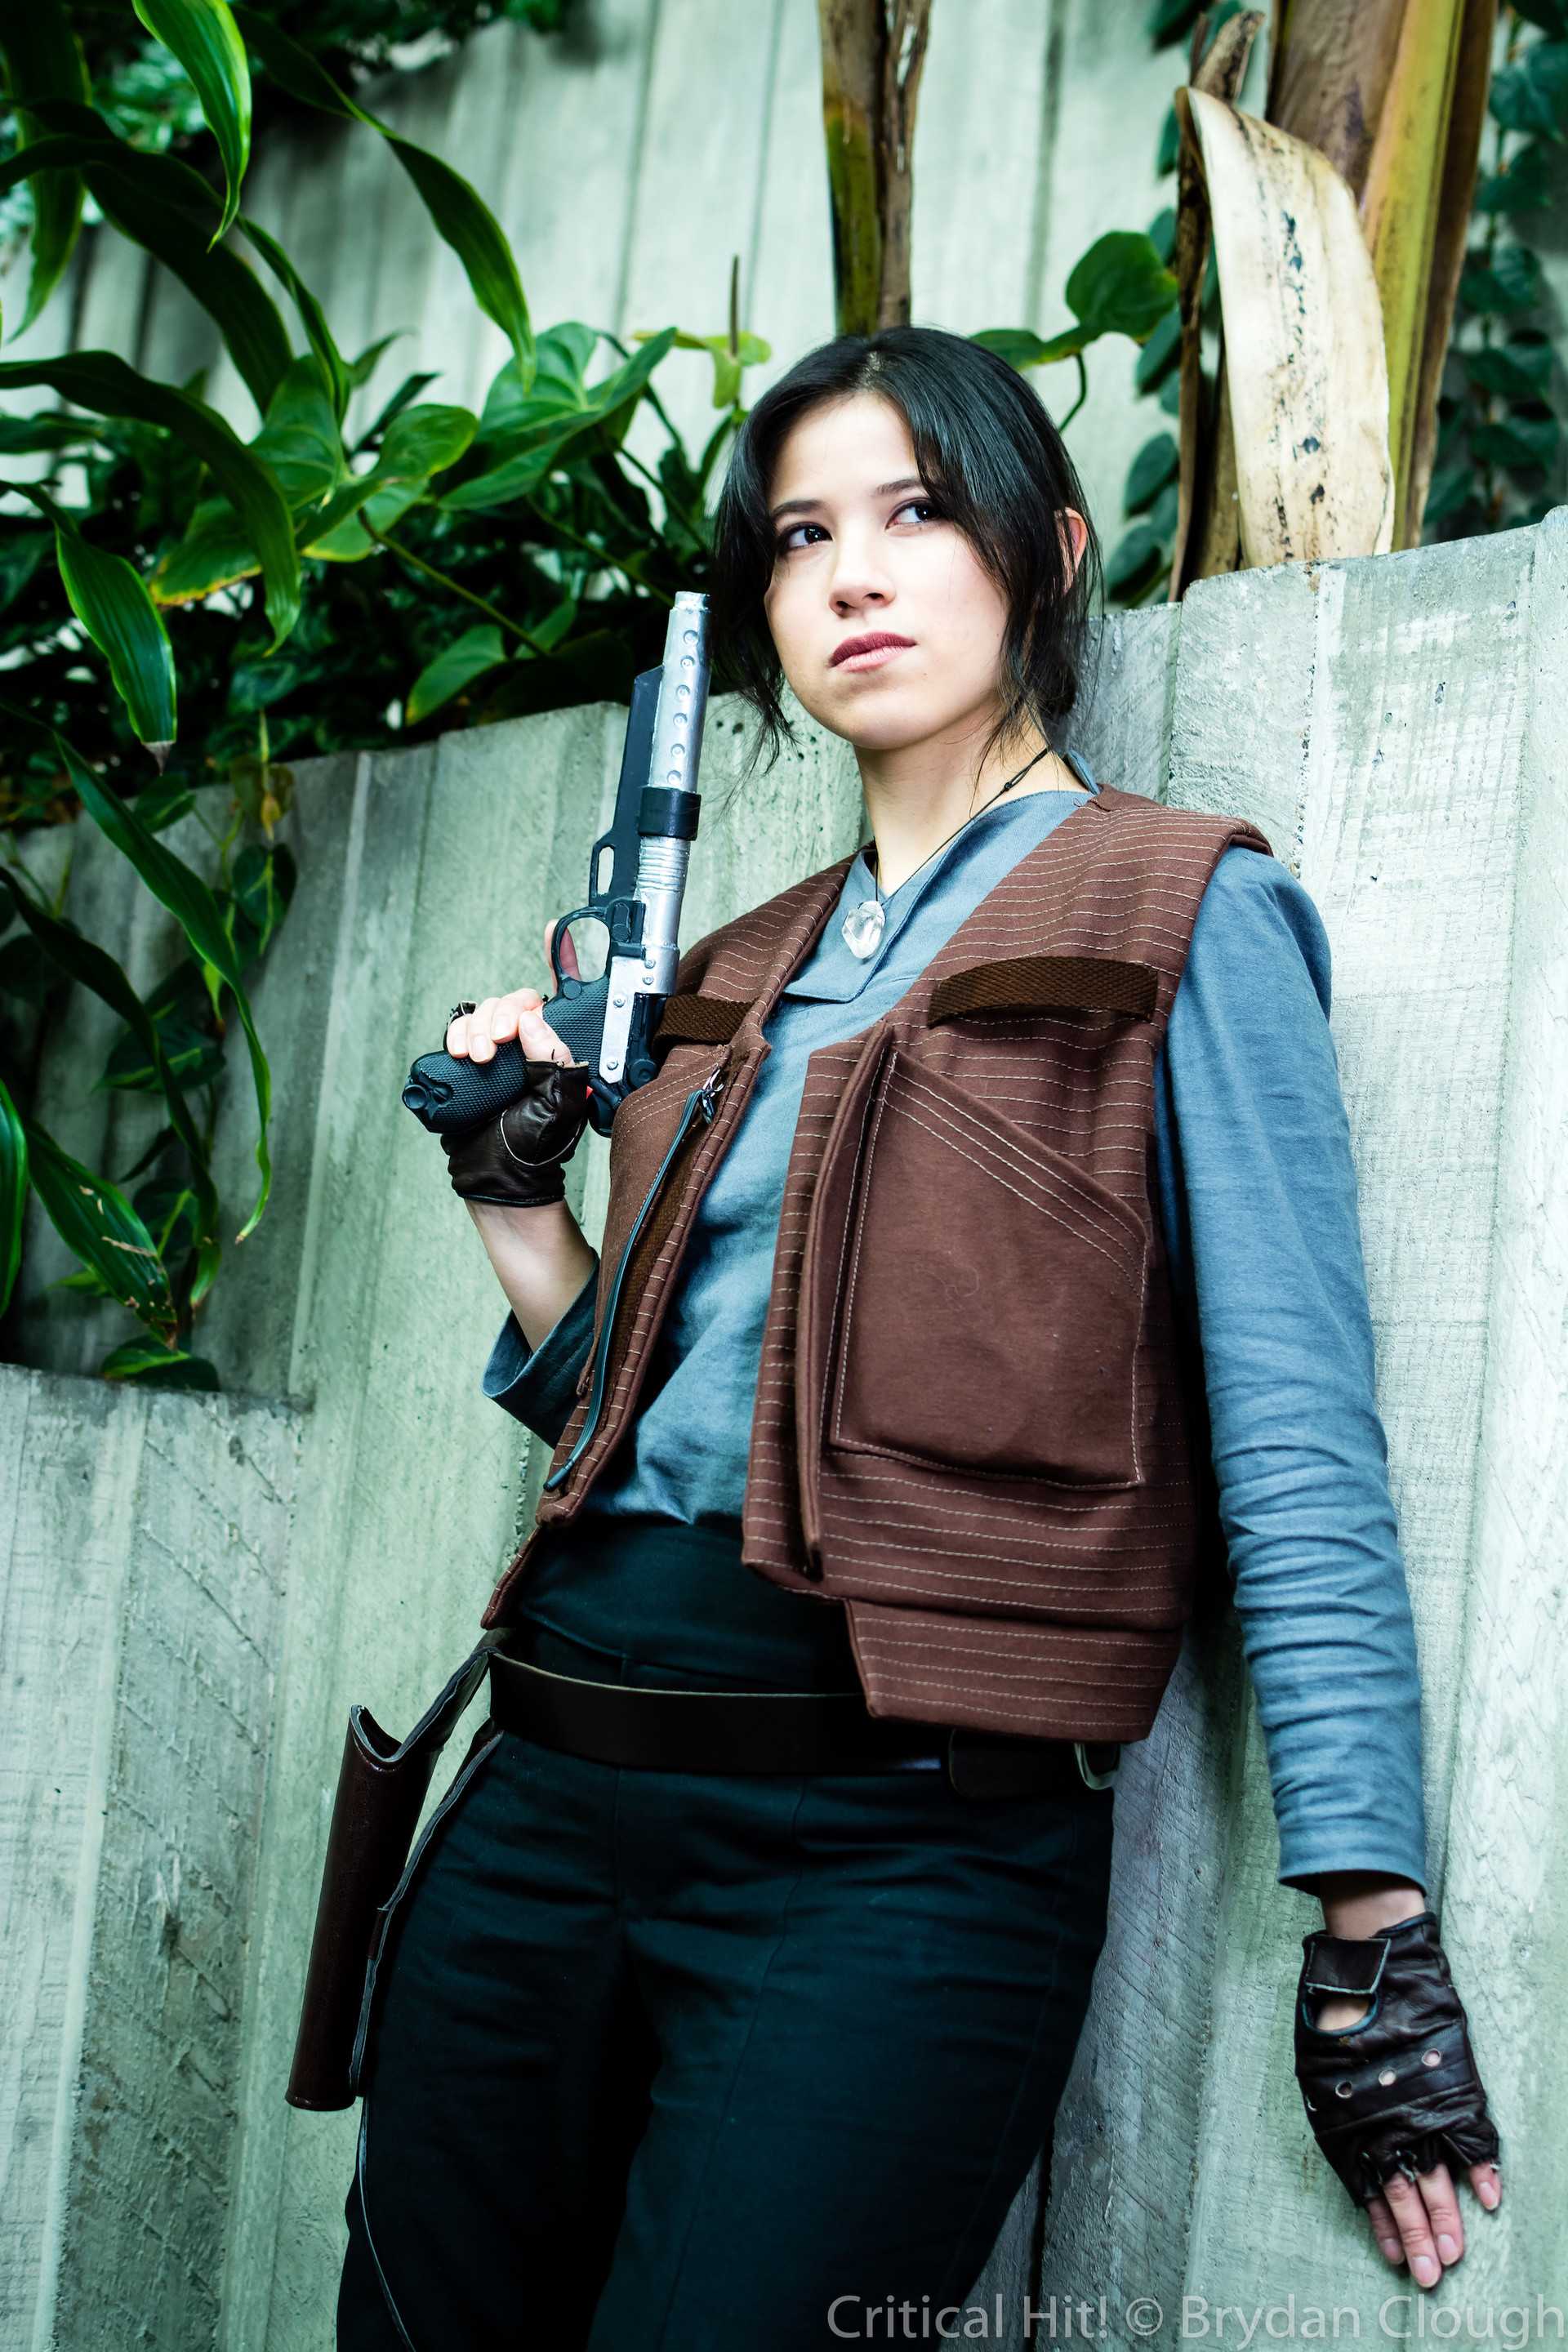 40 Hot Pictures Of The Disney Princess Jyn Erso Will Make You Melt | Best Of Comic Books